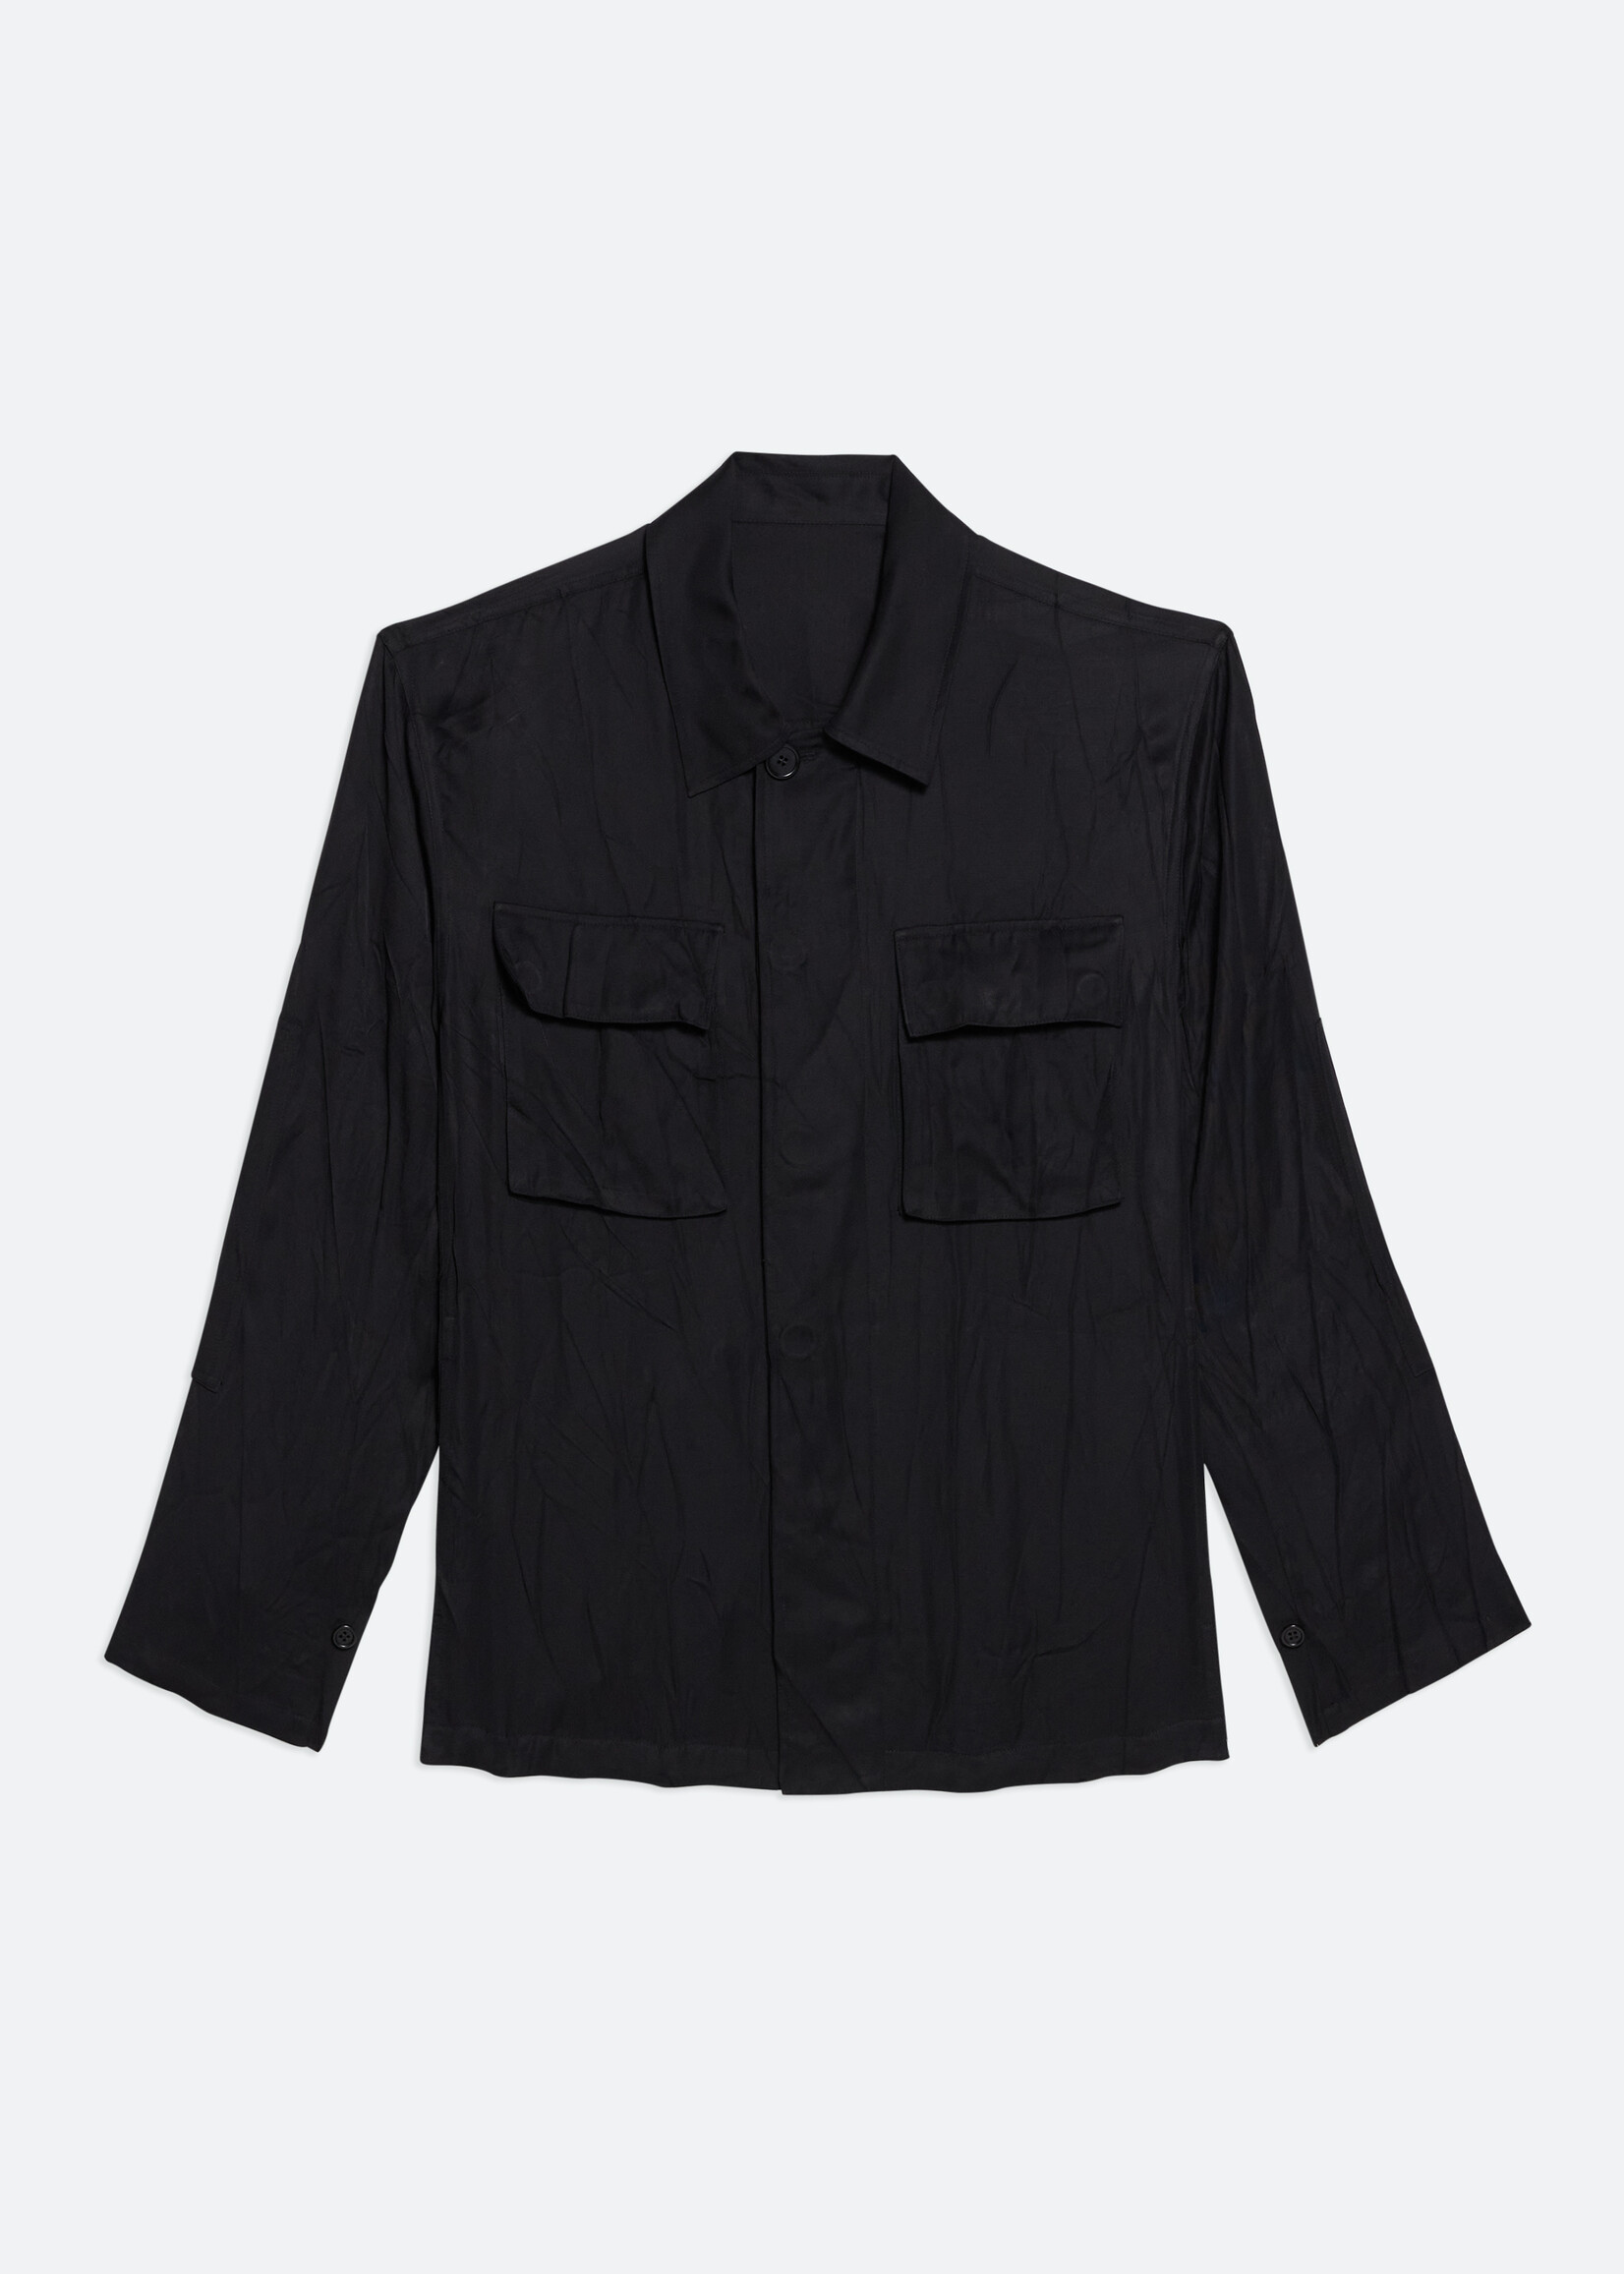 HELMUT LANG BY PETER DO Crushed Utility Jacket in Black